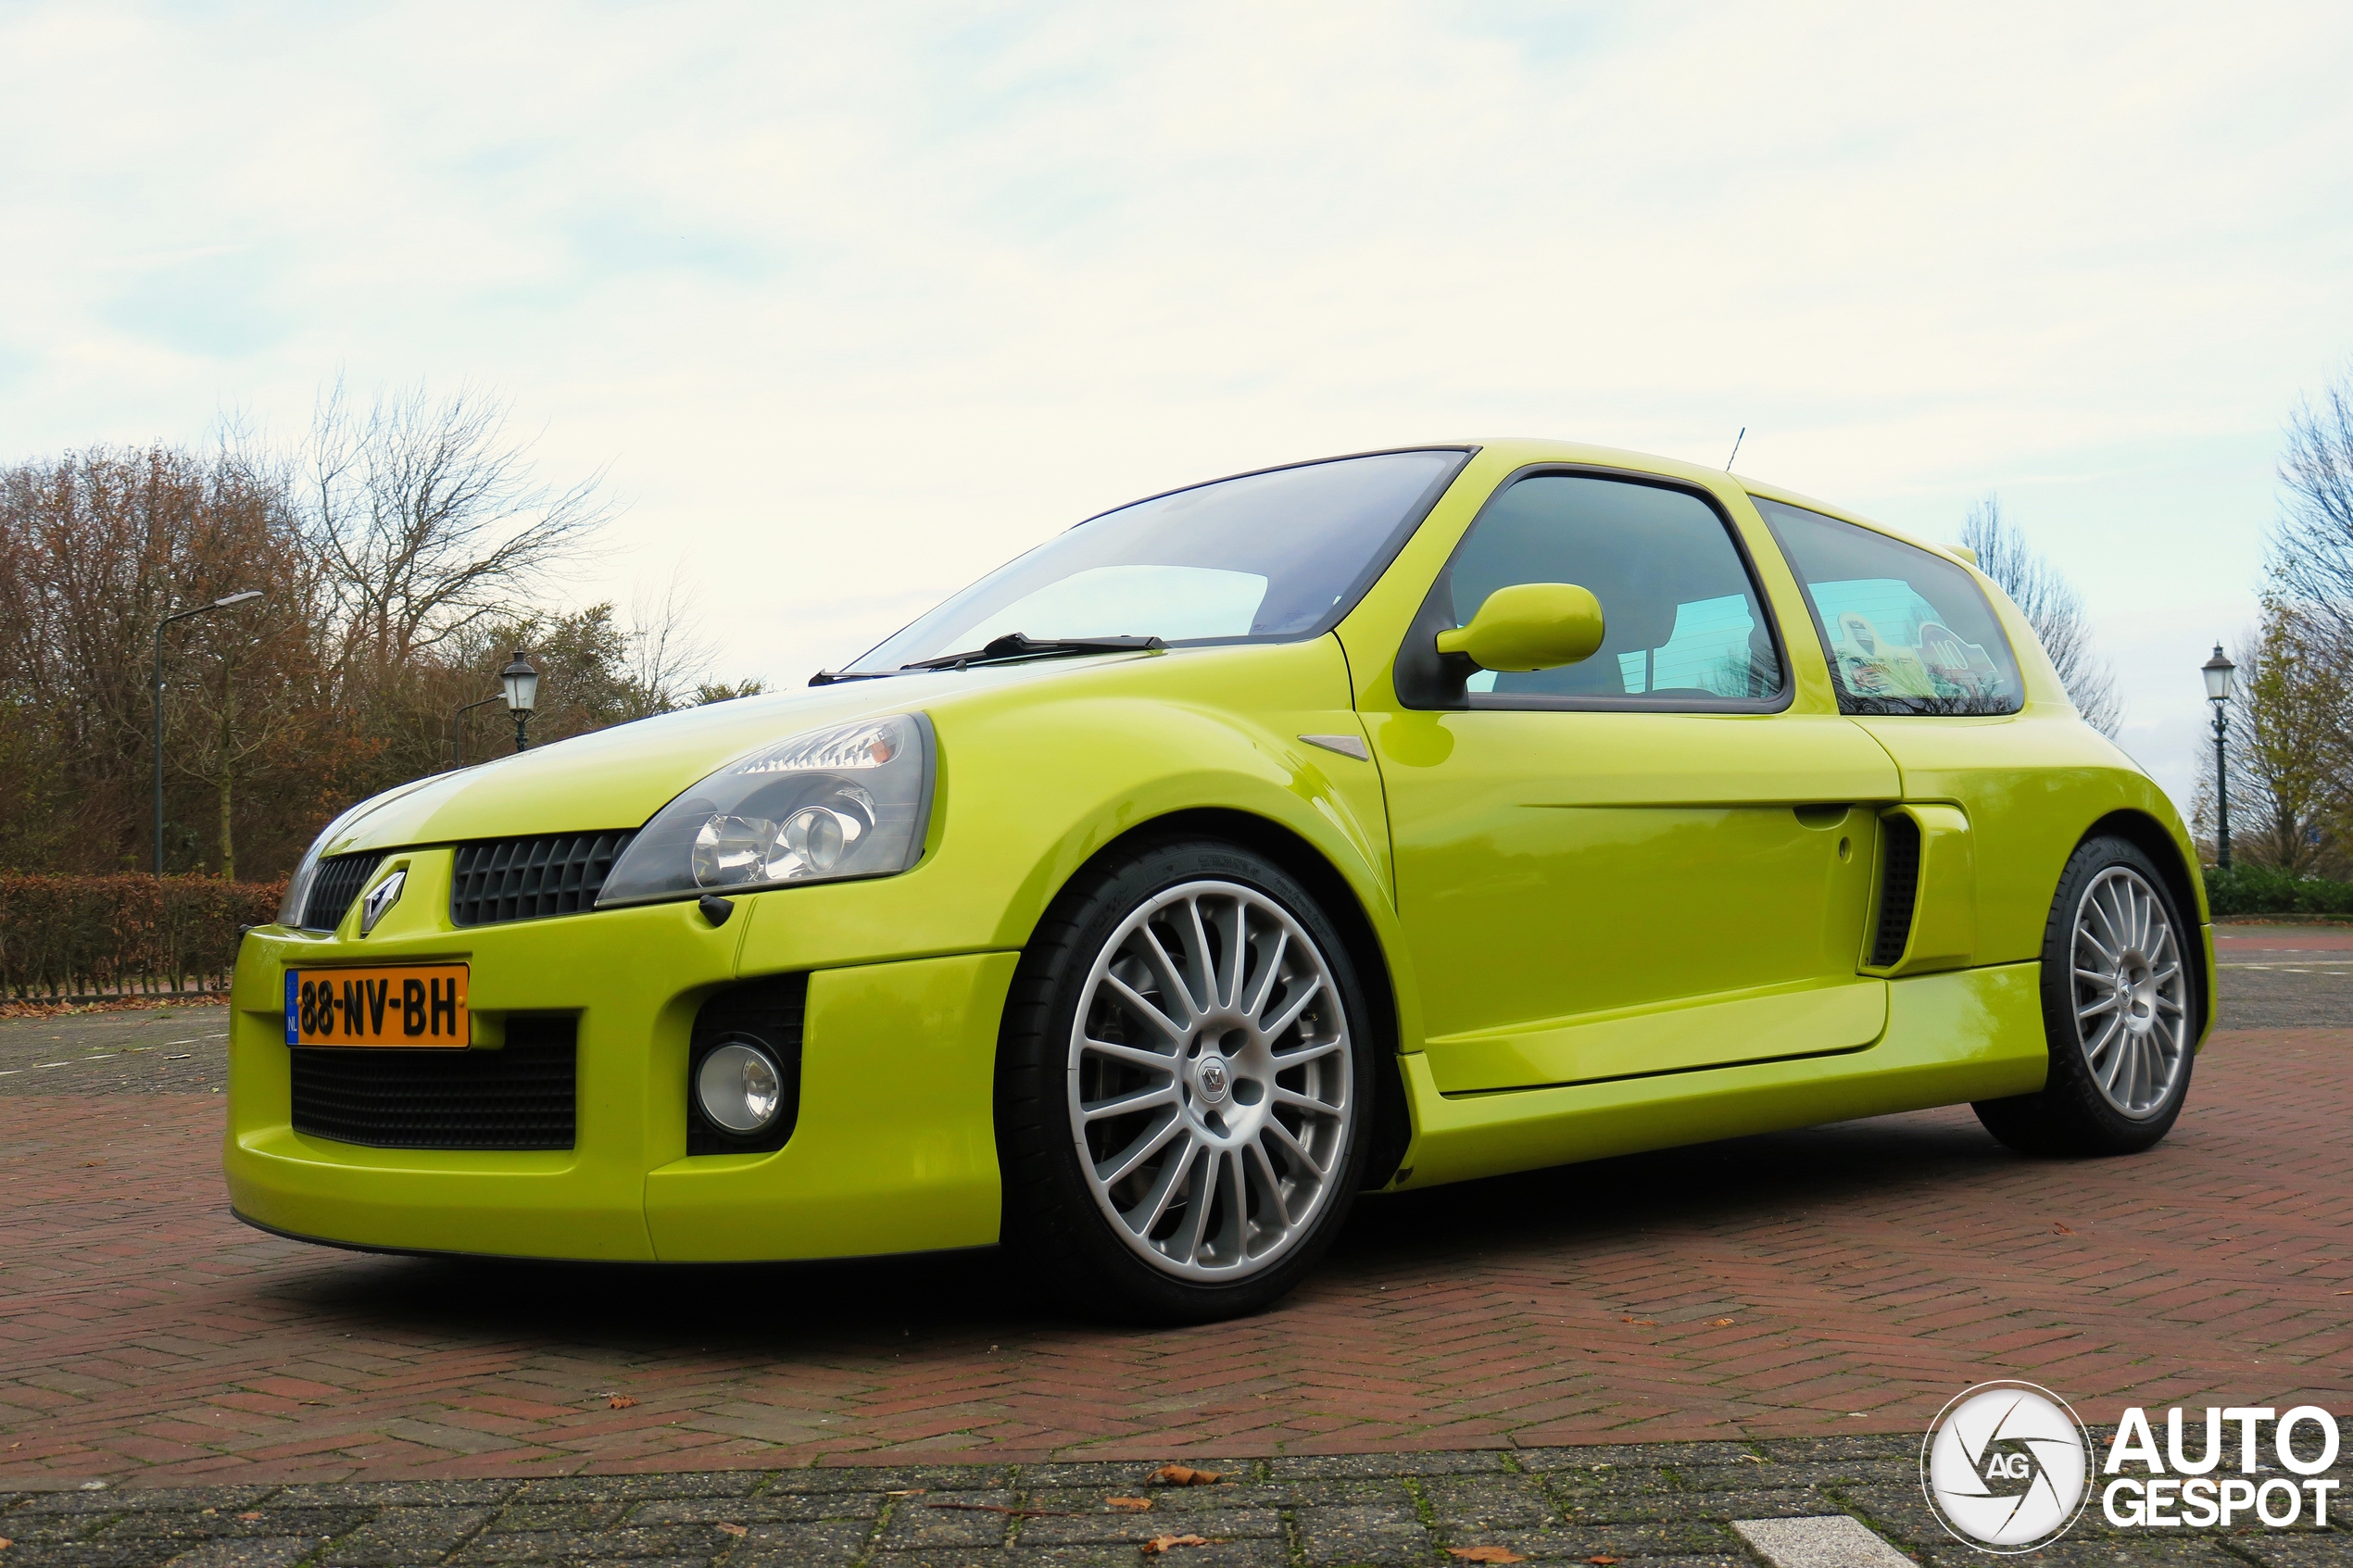 The famous Clio V6